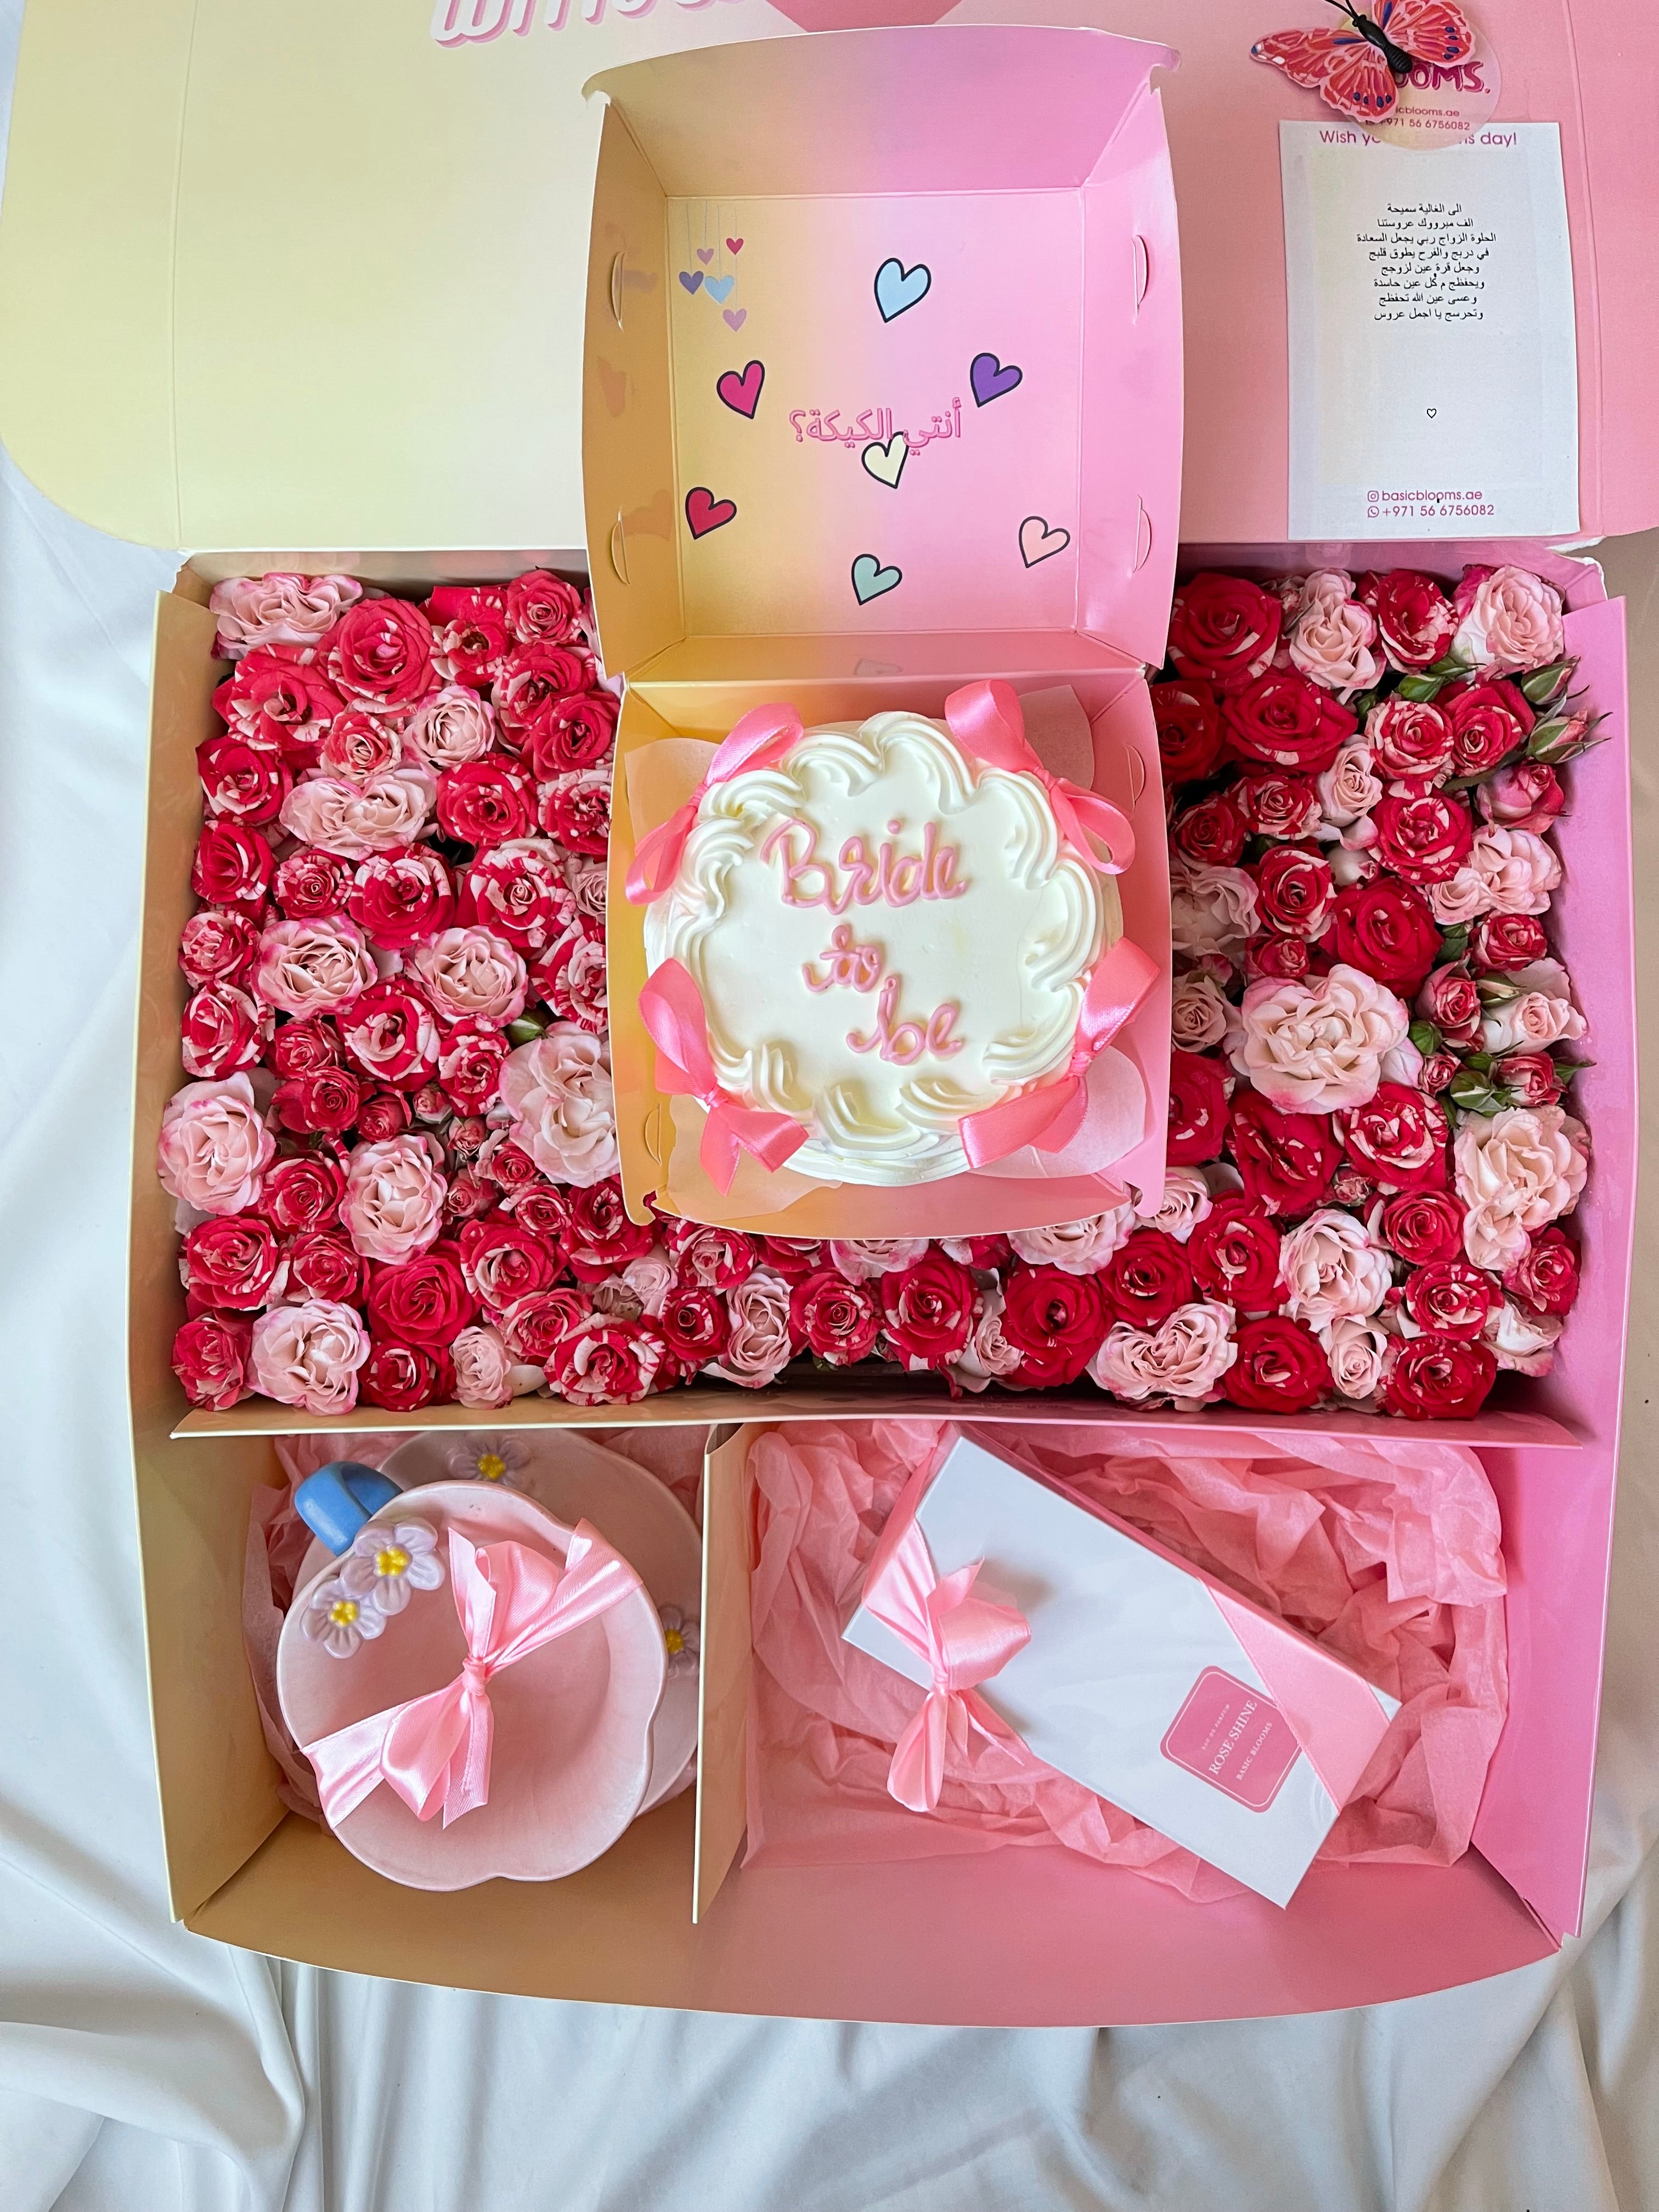 Bride to be flowers box💕